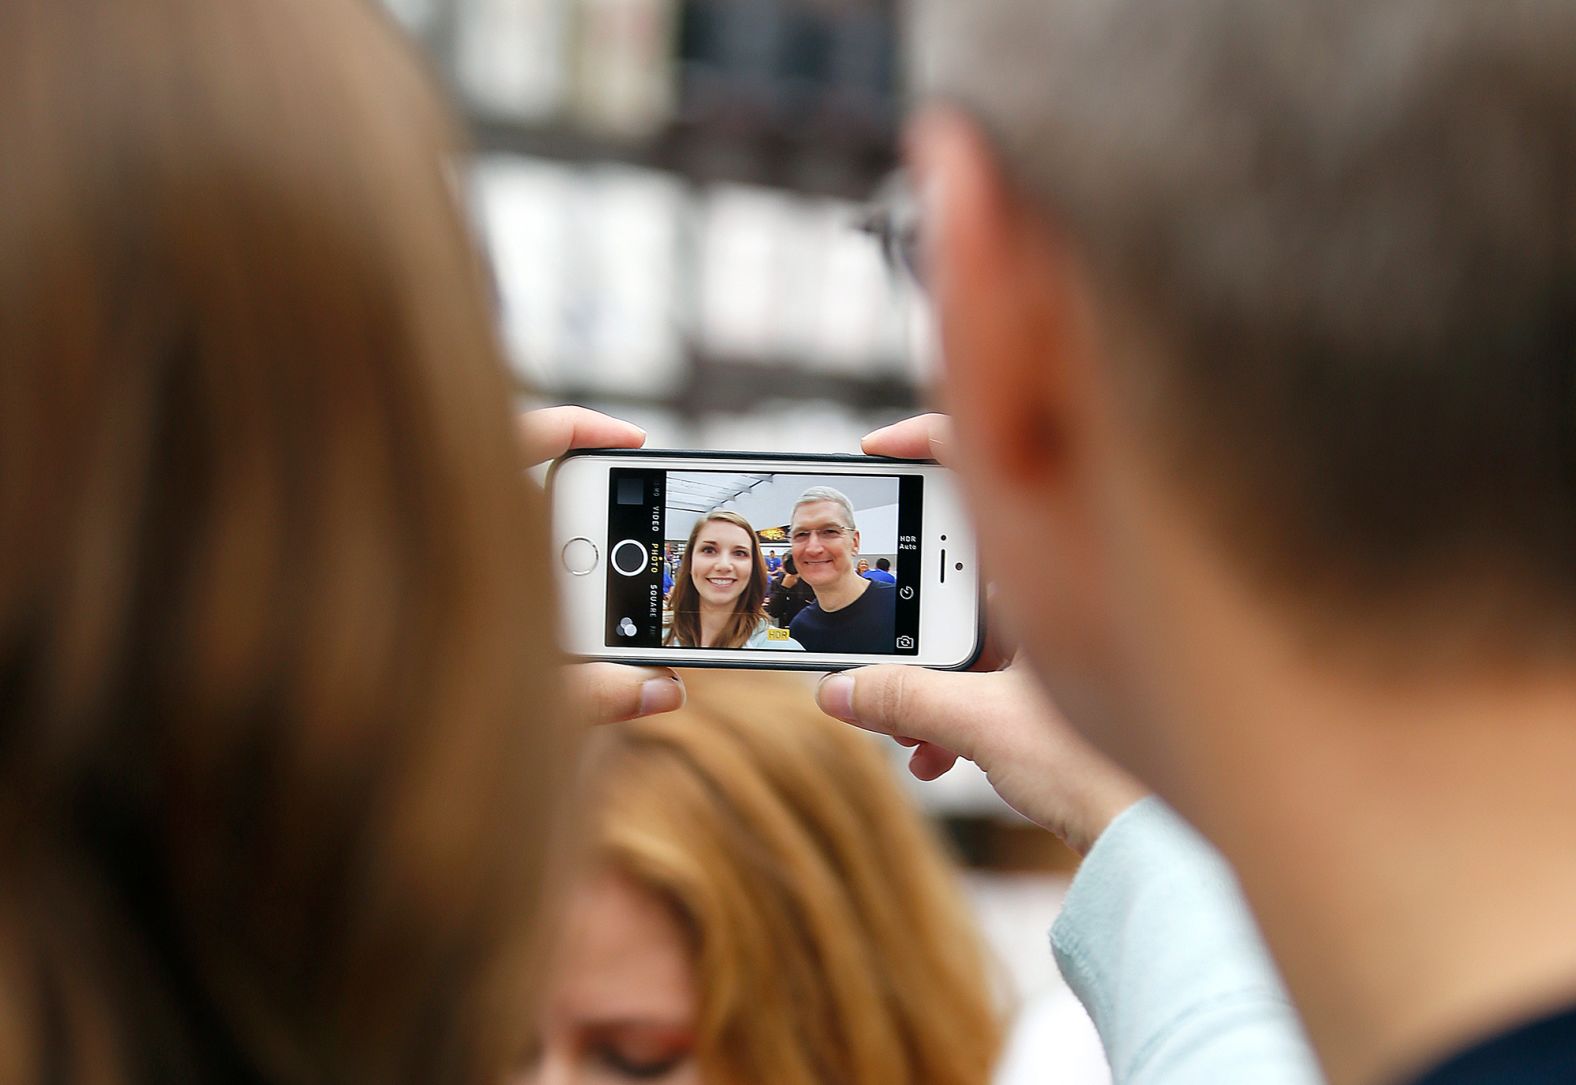 Cook takes a photo with an Apple employee during the launch of the iPhone 6 at an Apple store in Palo Alto, California, in September 2014.